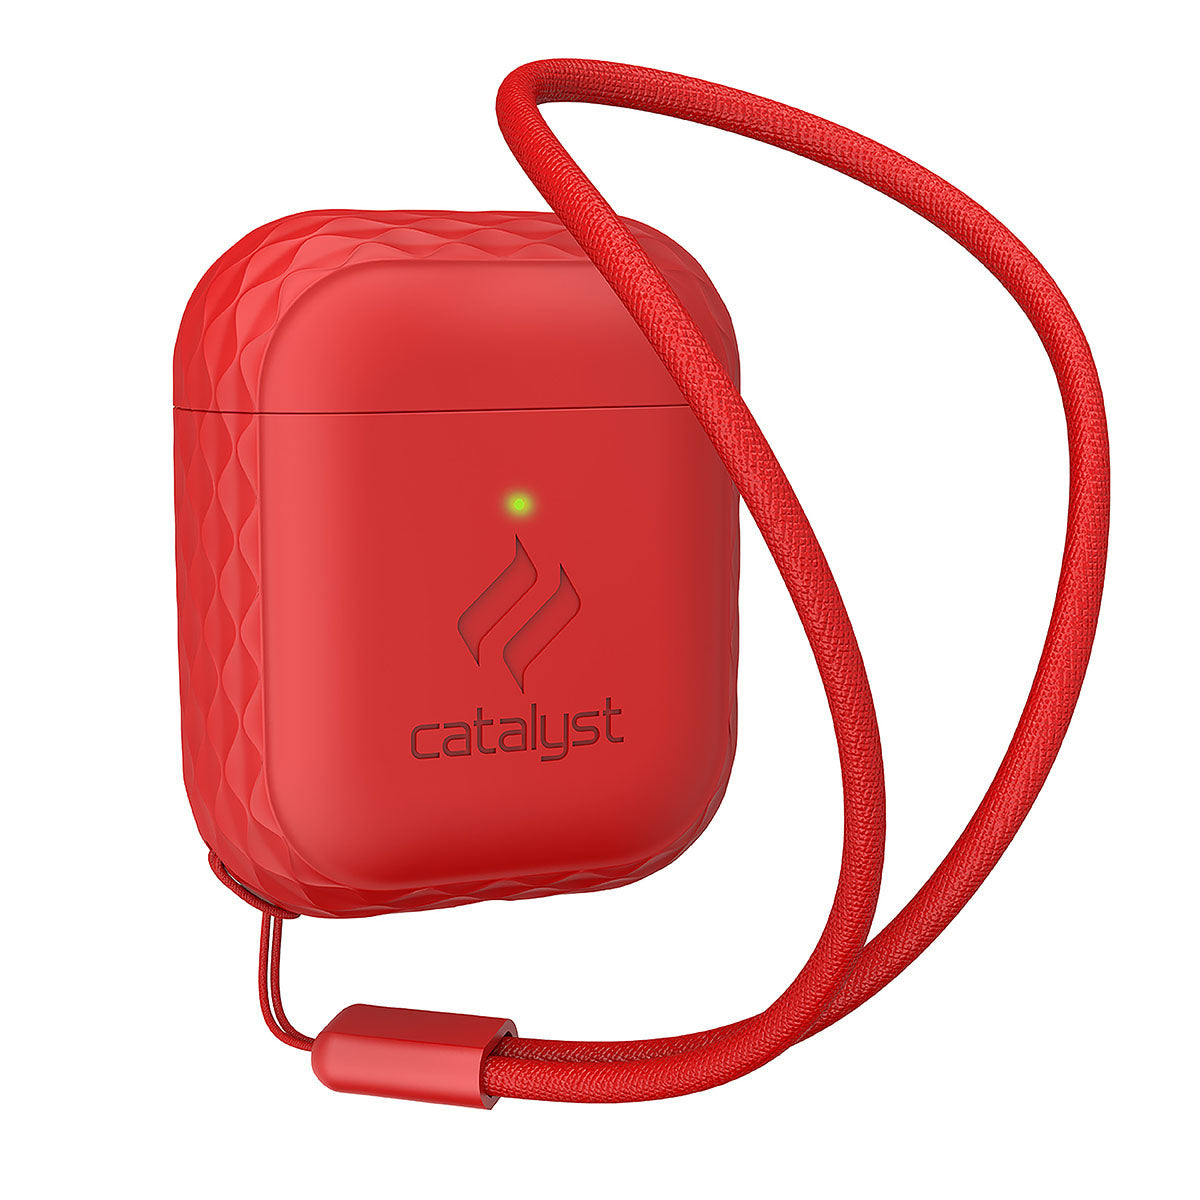 Catalyst airpods gen2/1 case lanyard showing the side of the case with lanyard